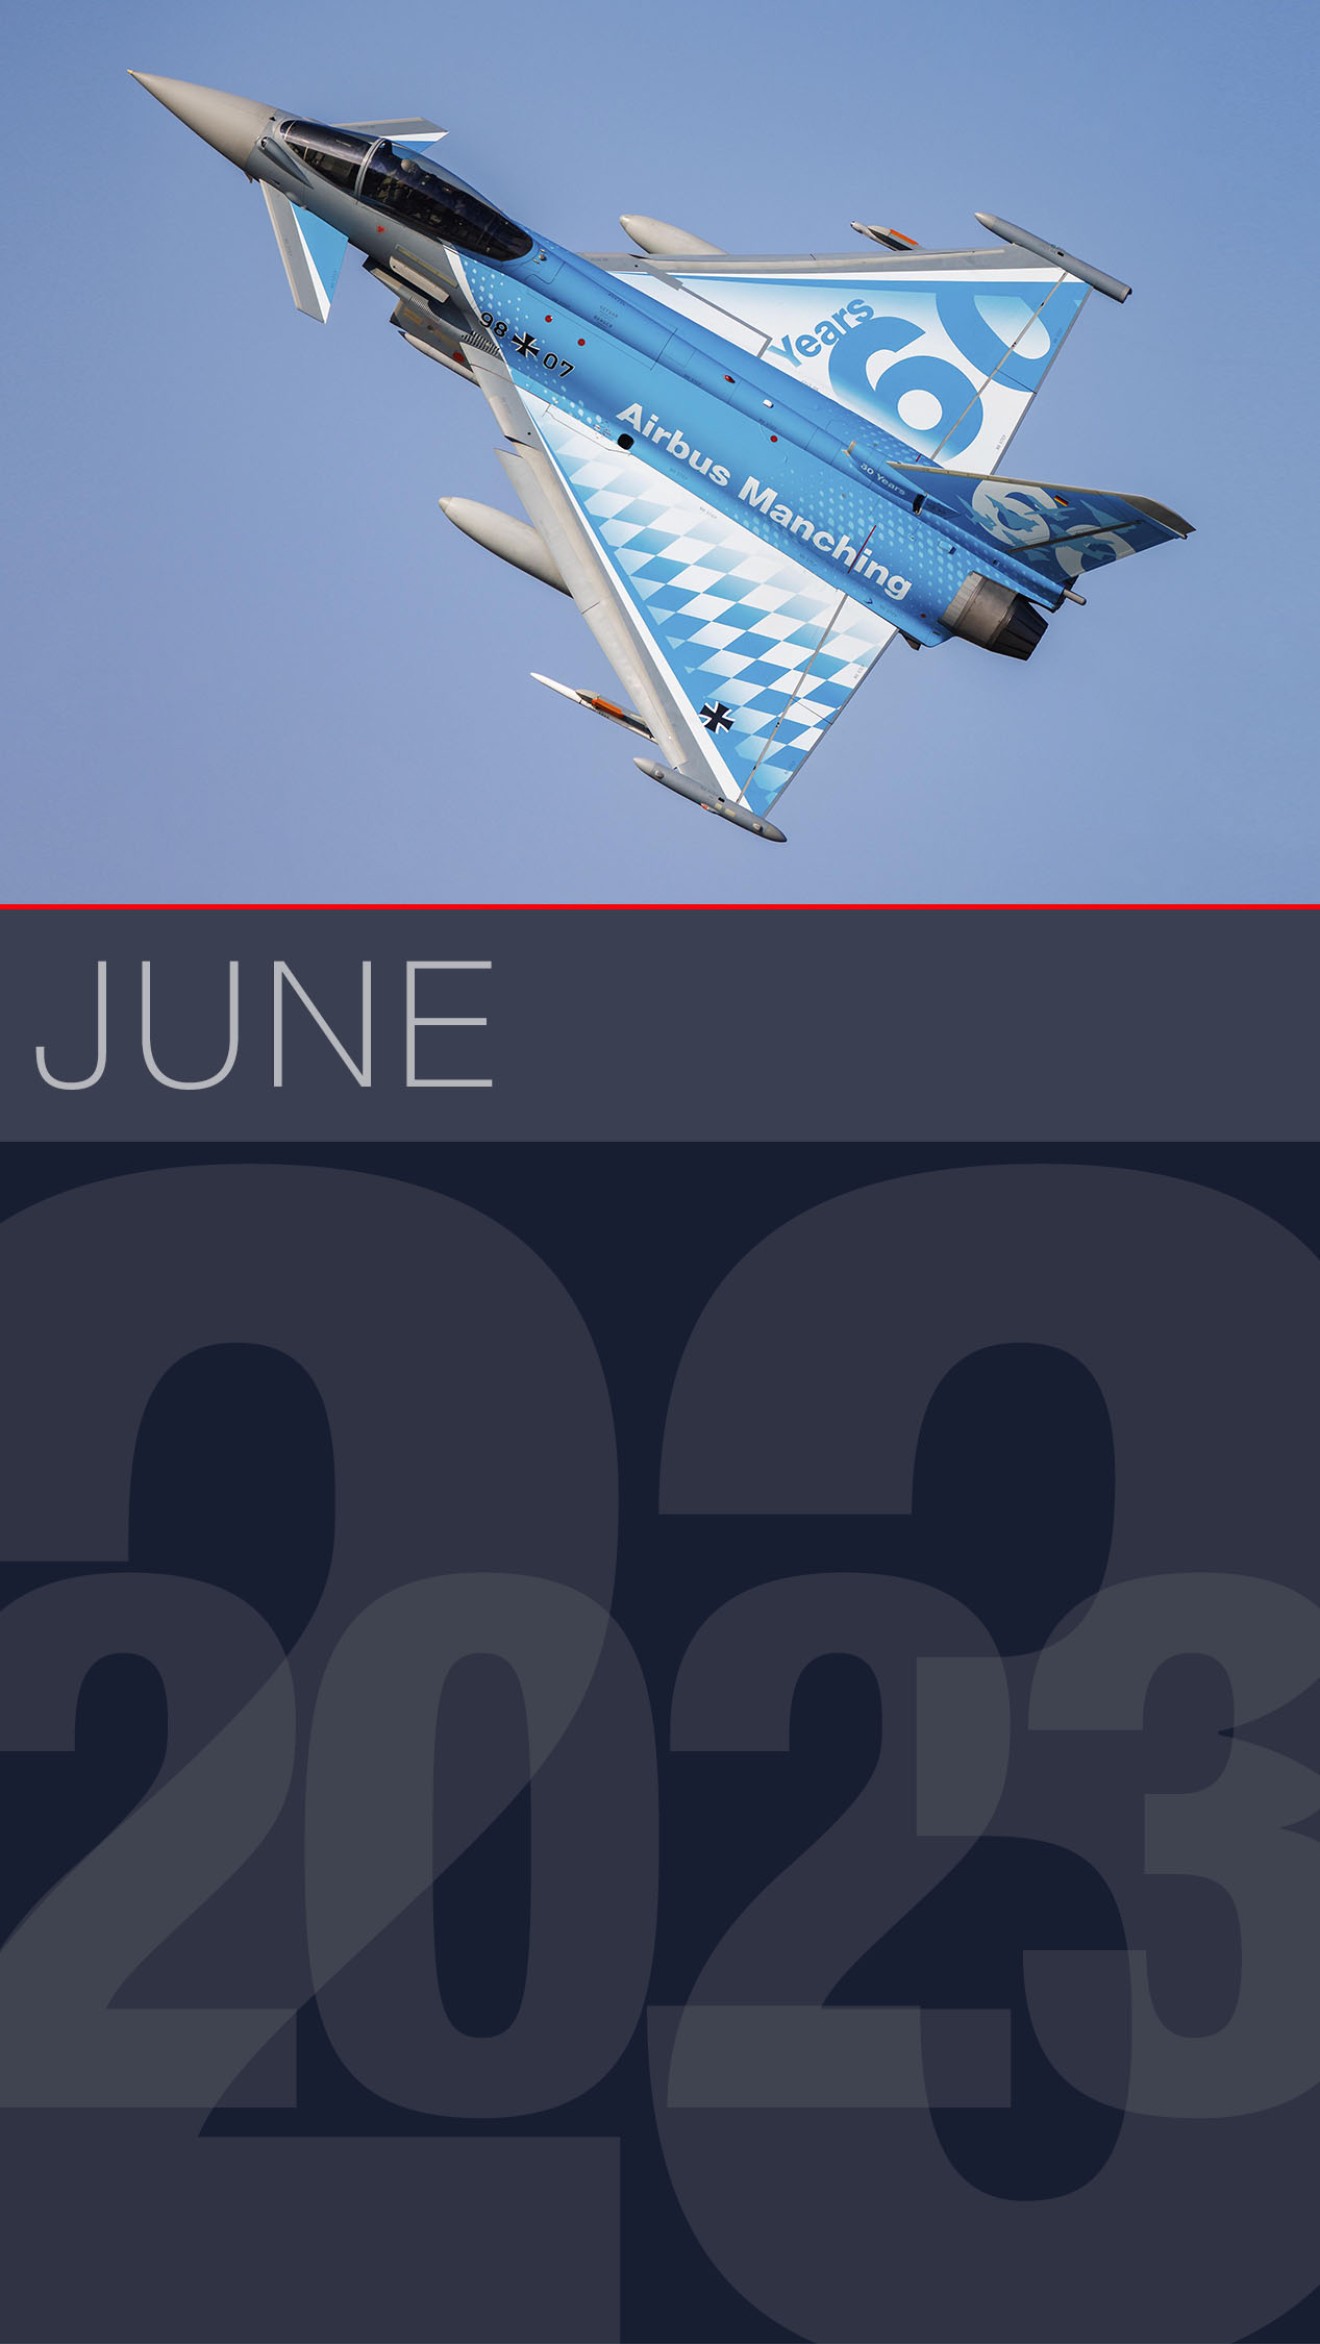 A German Eurofighter Typhoon with special markings celebrating the 60th anniversary of Airbus Manching, Germany.